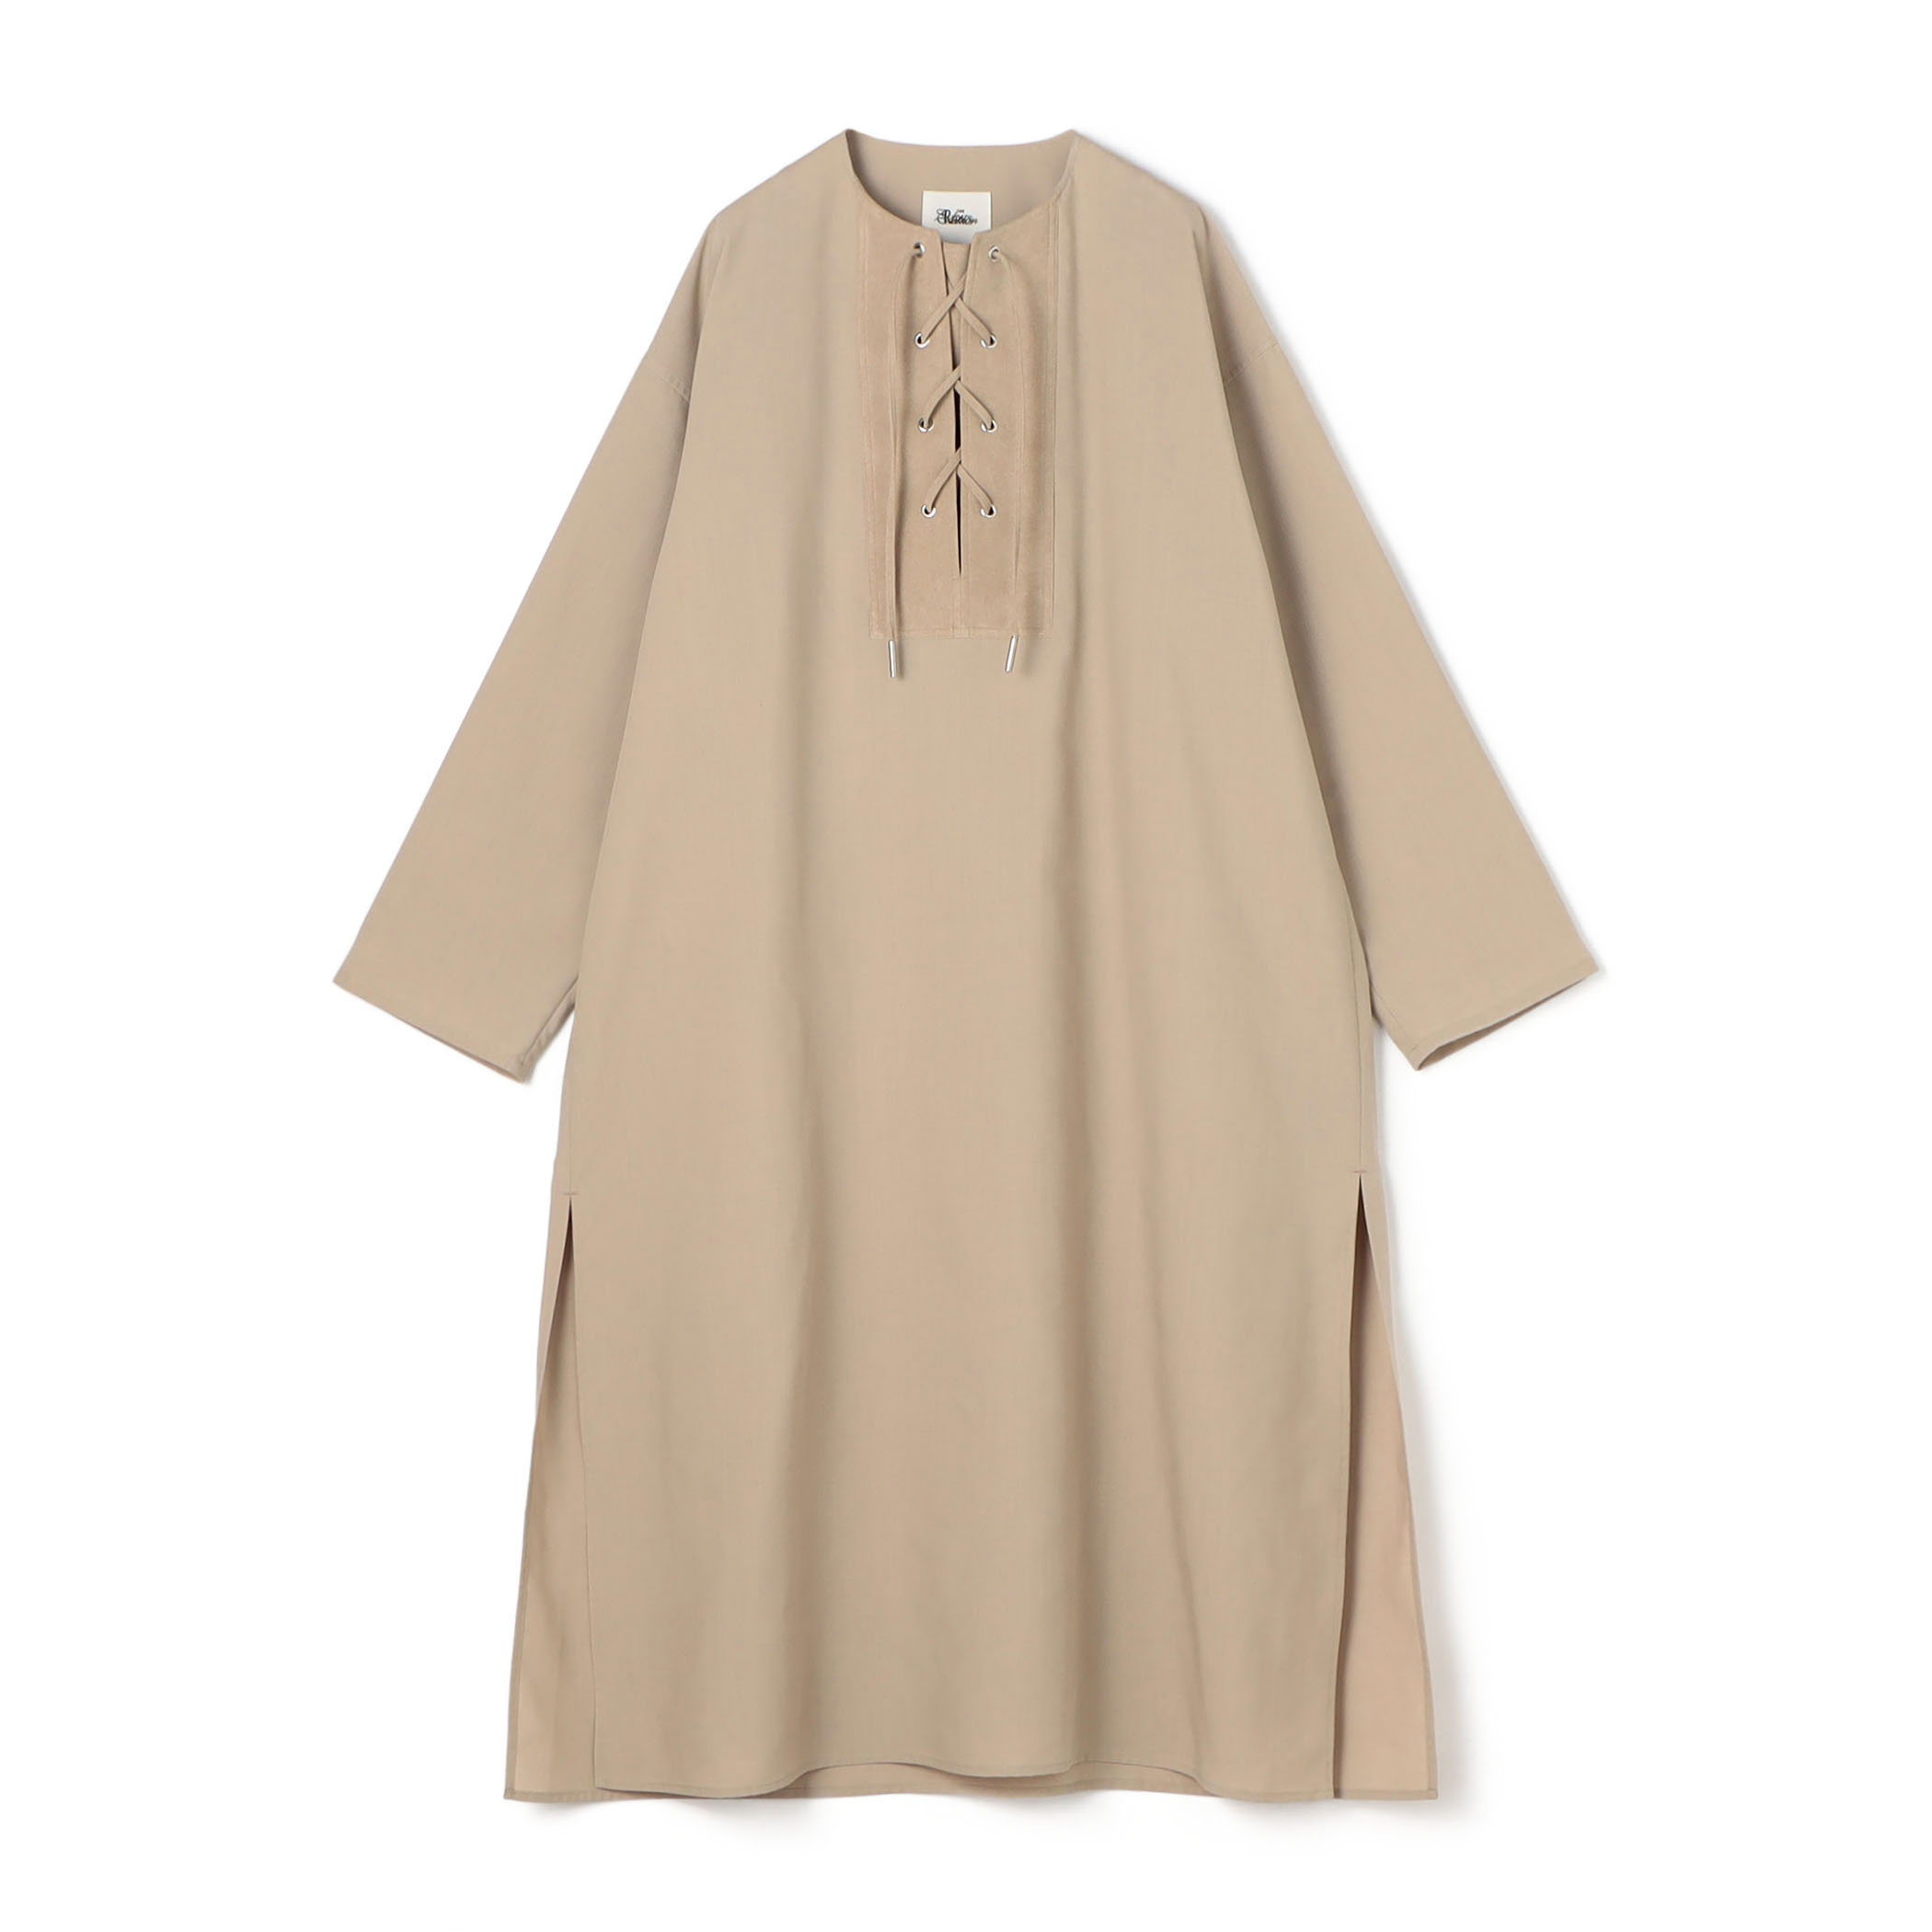 Edition×THE RERACS Collaboration Label LACE-UP DRESS